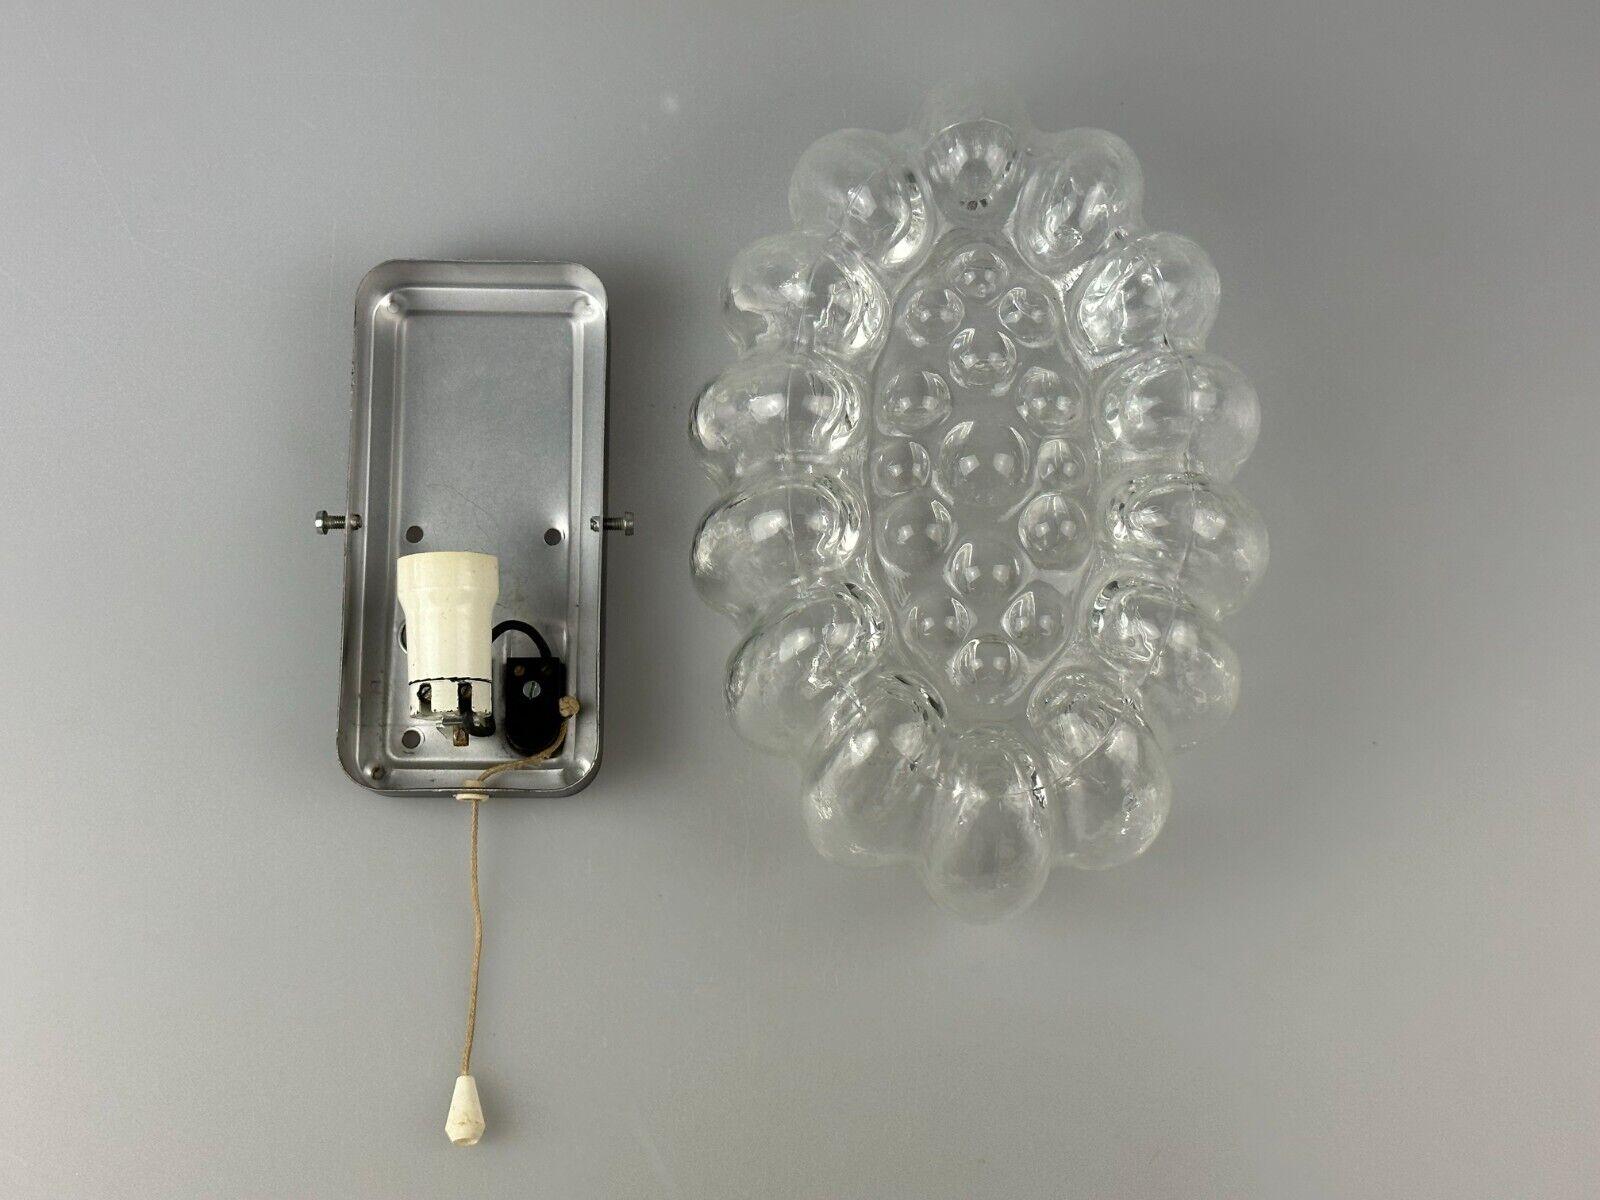 60s 70s wall lamp made of glass & metal bubble wall sconce space age design For Sale 10